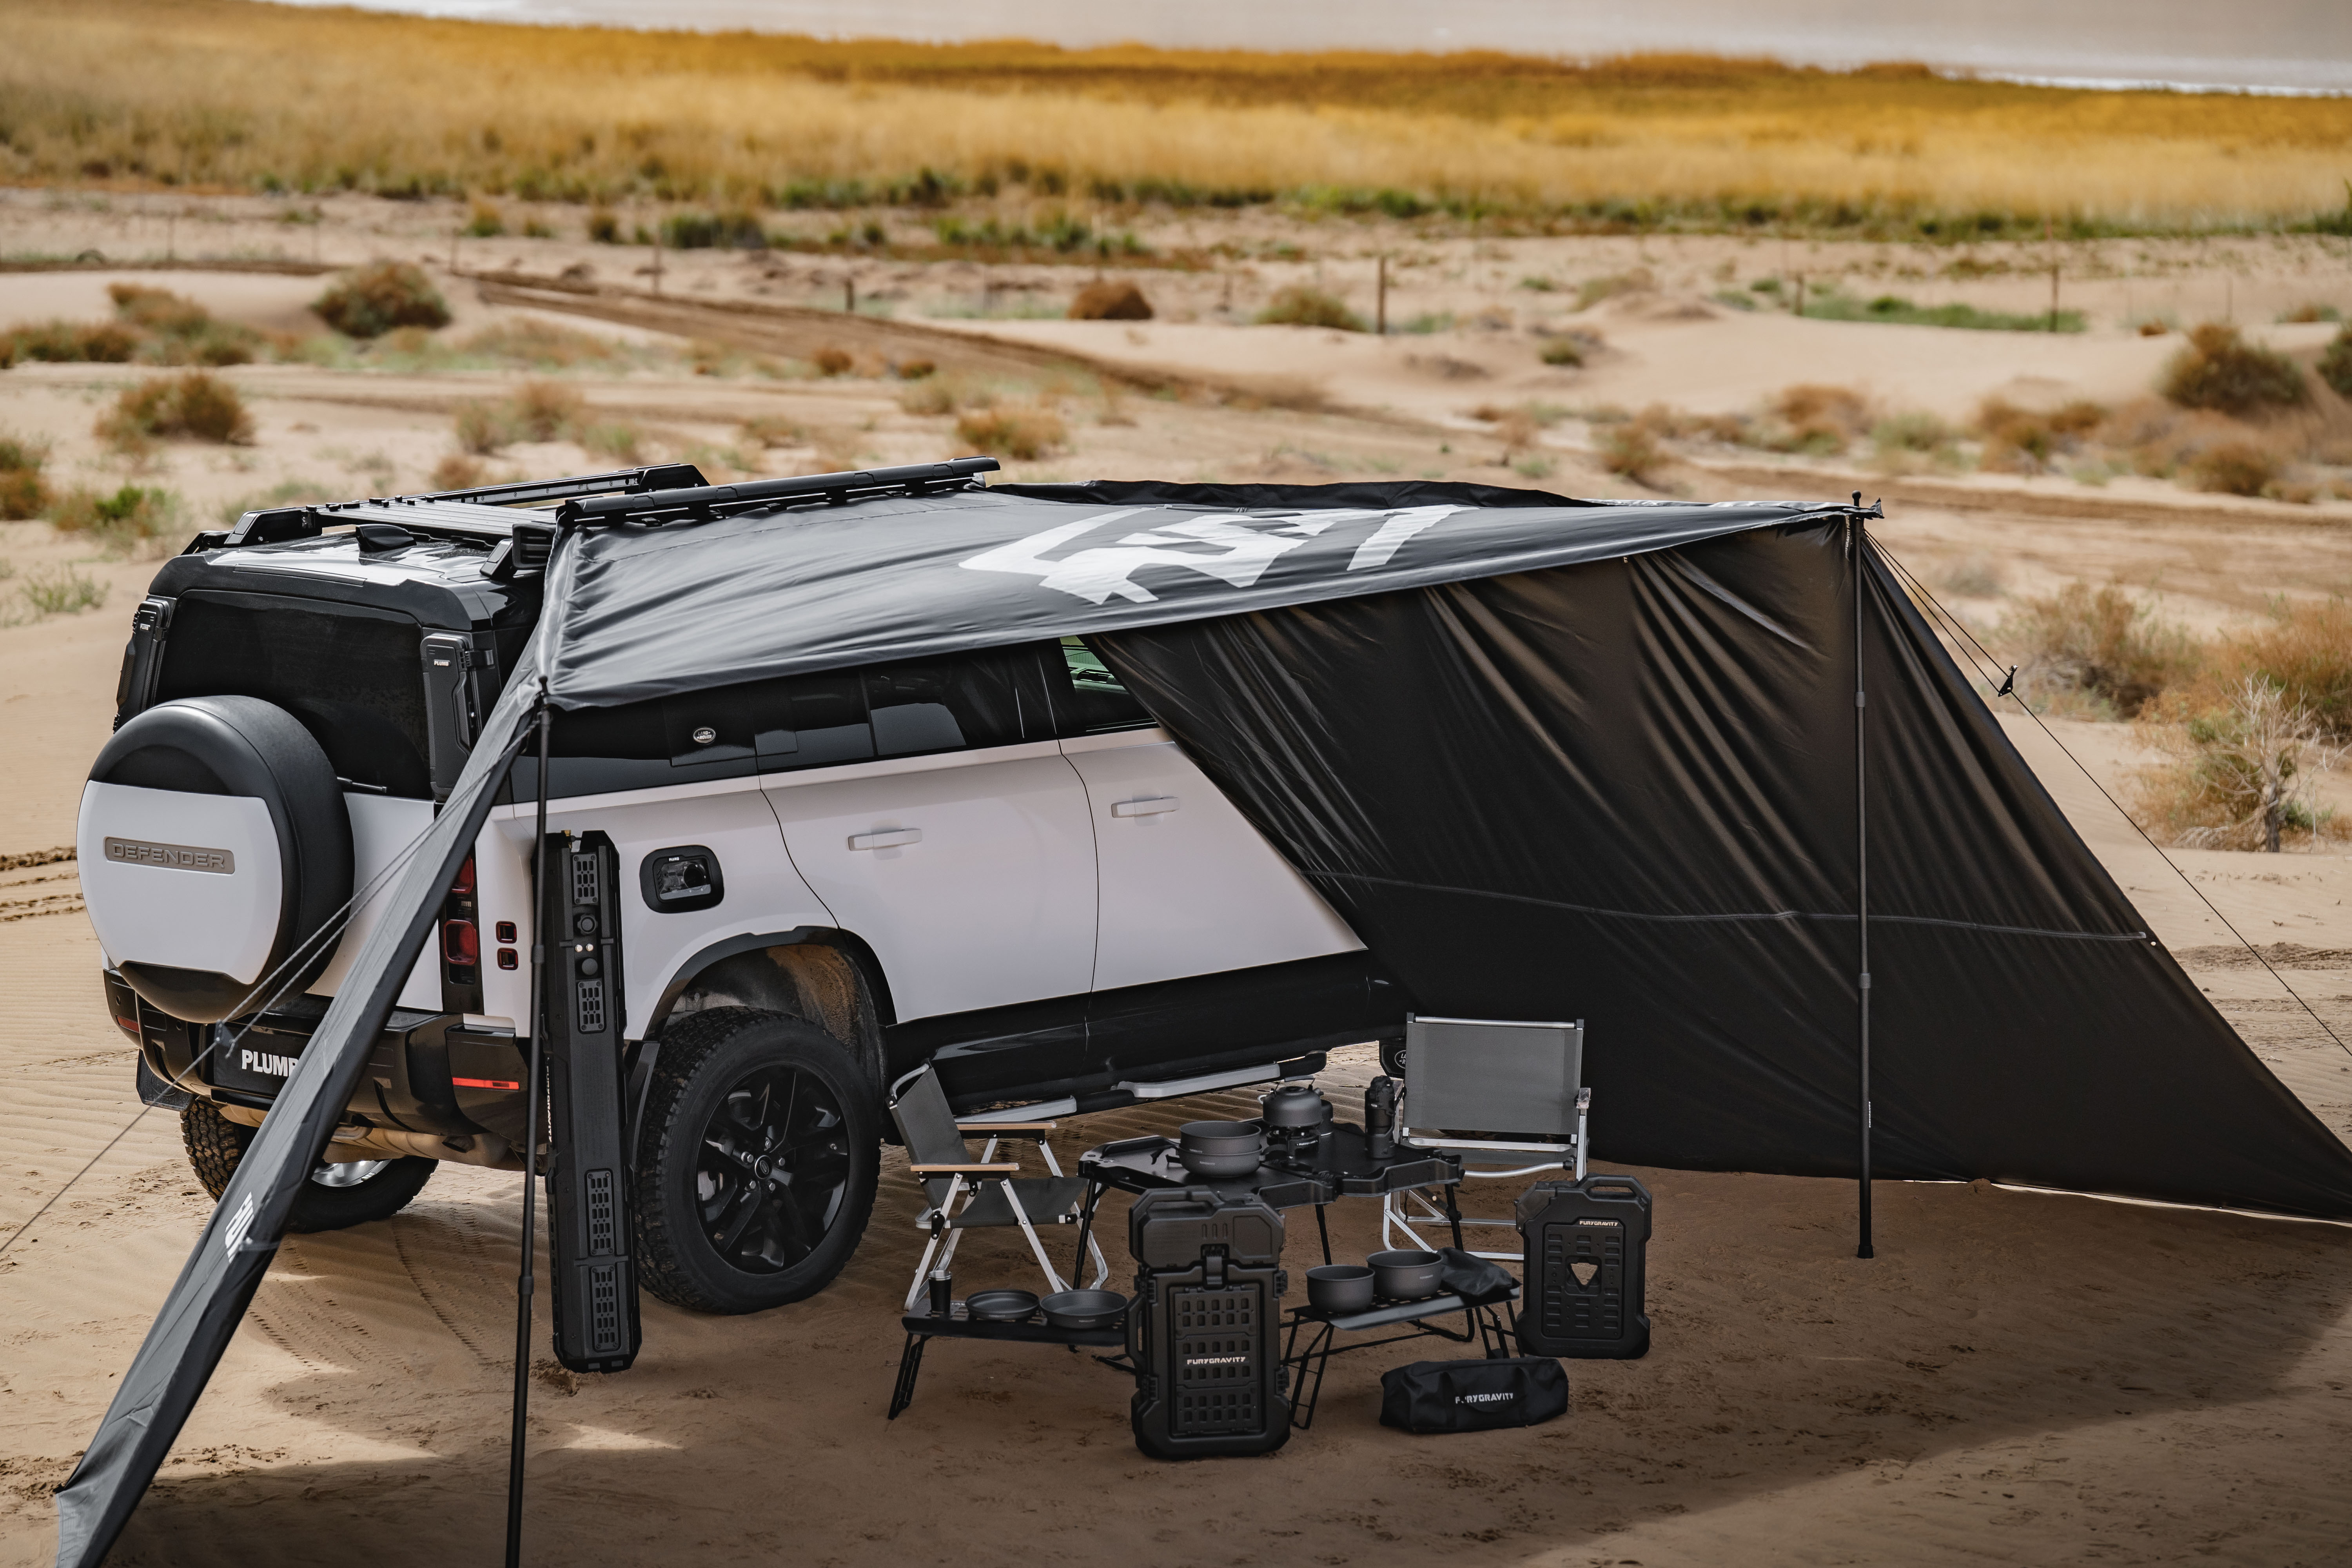 Fury Gravity Wrangler Car Side Tent Vinyl Canopy Outdoor Camping Tank 300 Off-Road Car Tent Gear